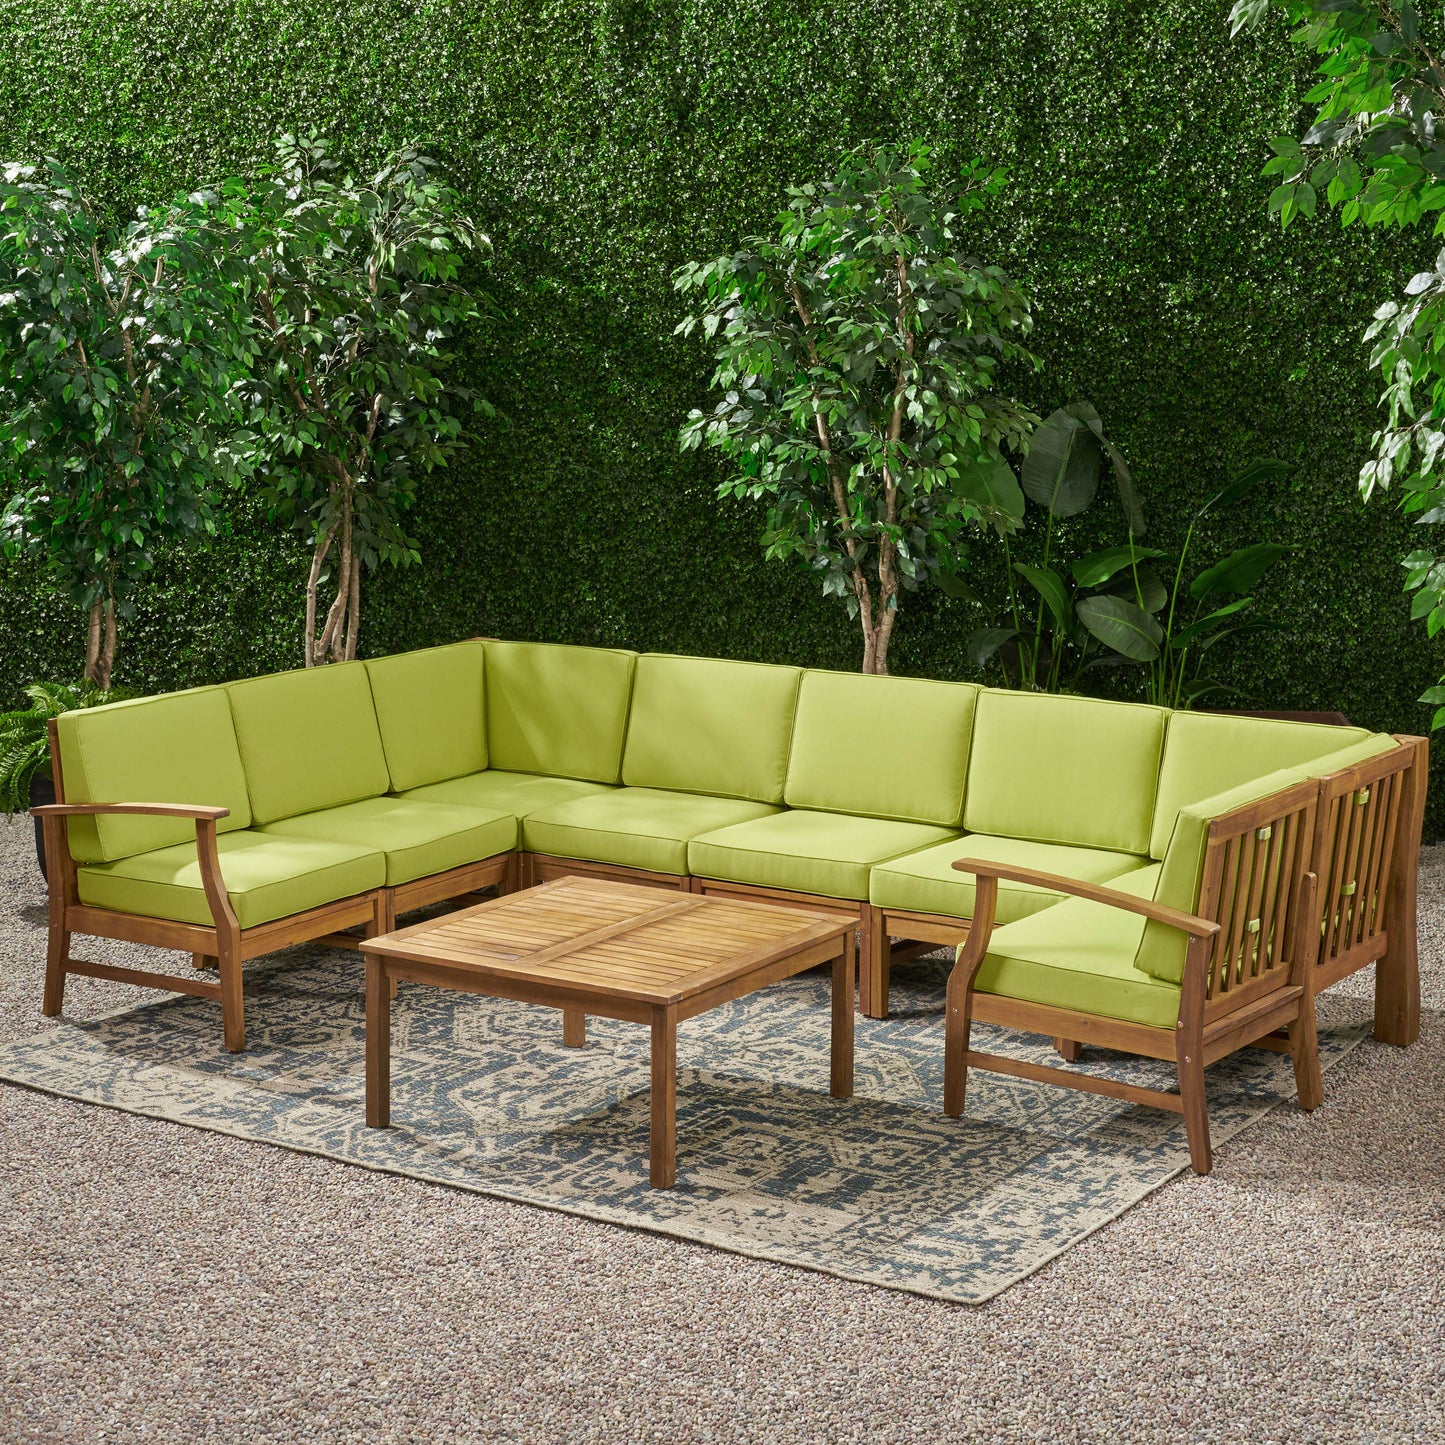 Scarlett Outdoor 8 Seat Teak Finished Acacia Wood Sectional Sofa and Table Set